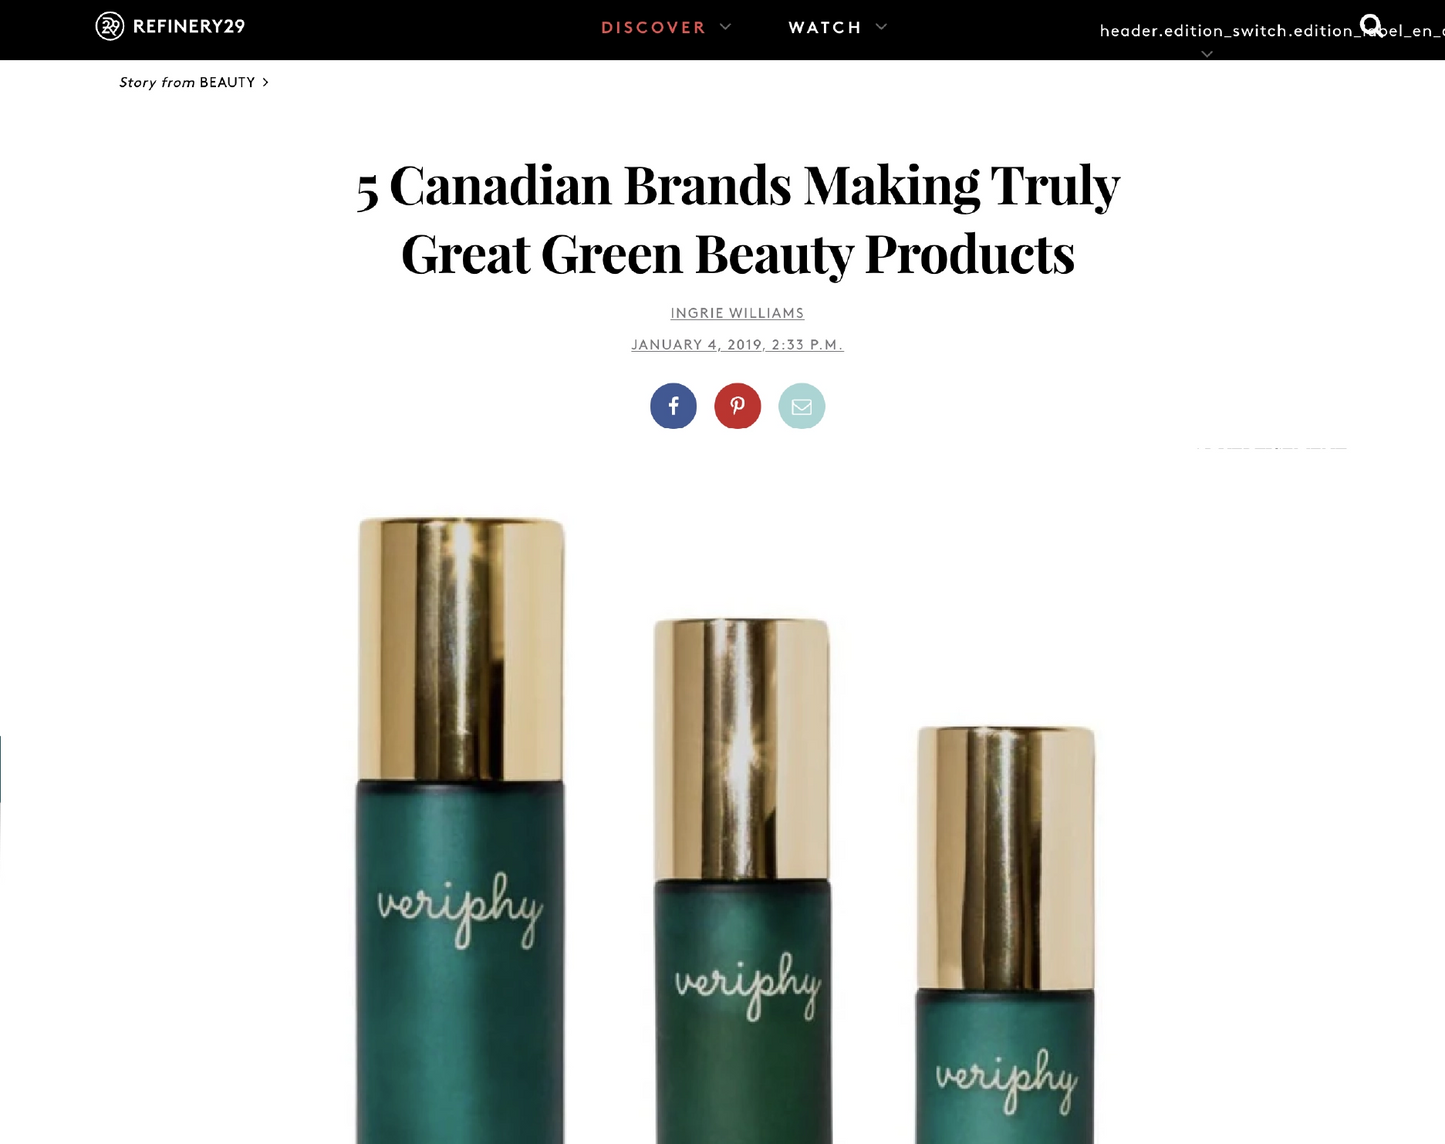 Veriphy Skincare featured in Refinery29